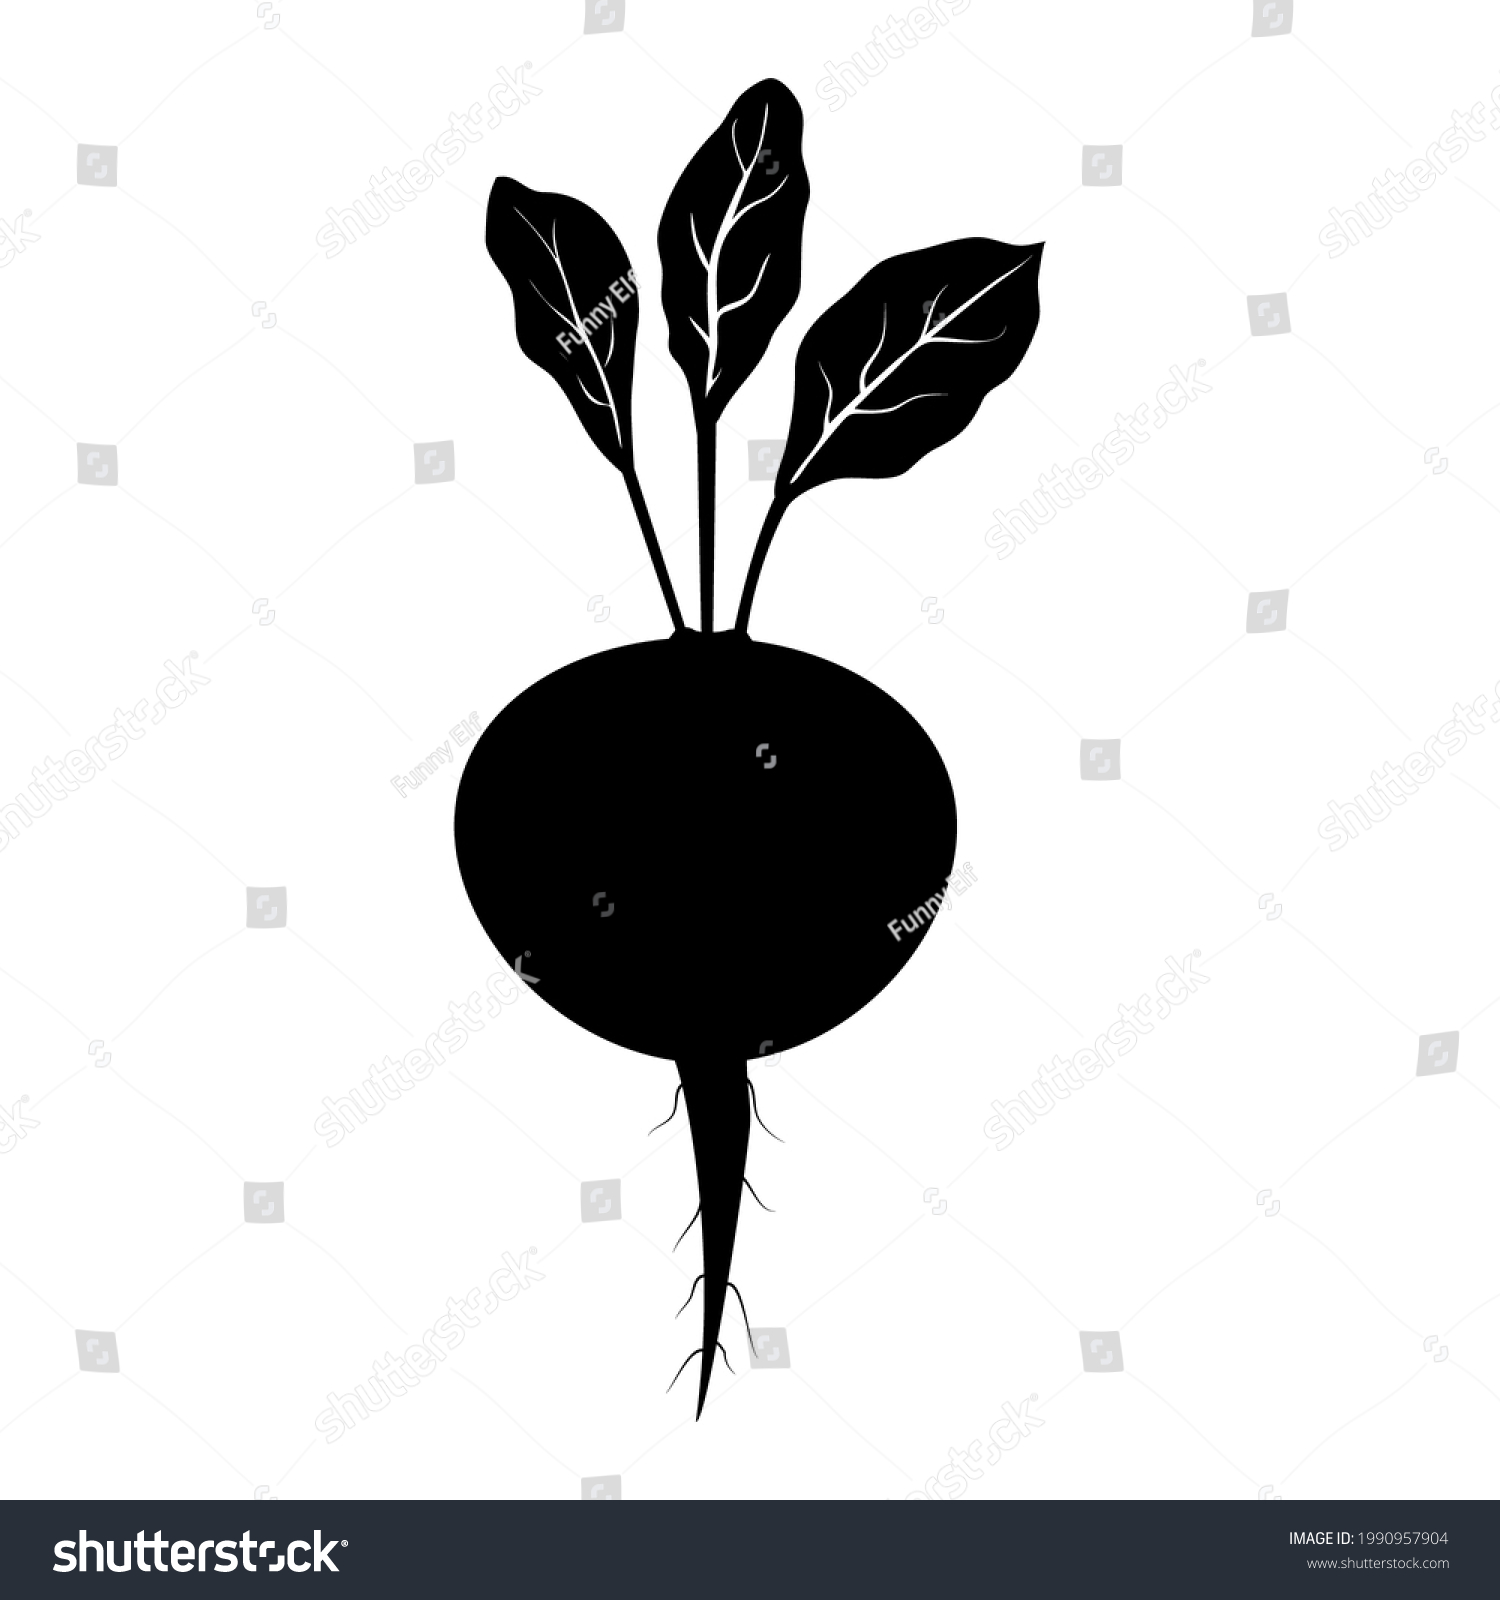 Silhouette of beets, sugar beet. Flat black silhouette on a white background. Drawn beets with white veins on the leaves. The side view of the vegetable is shown #1990957904